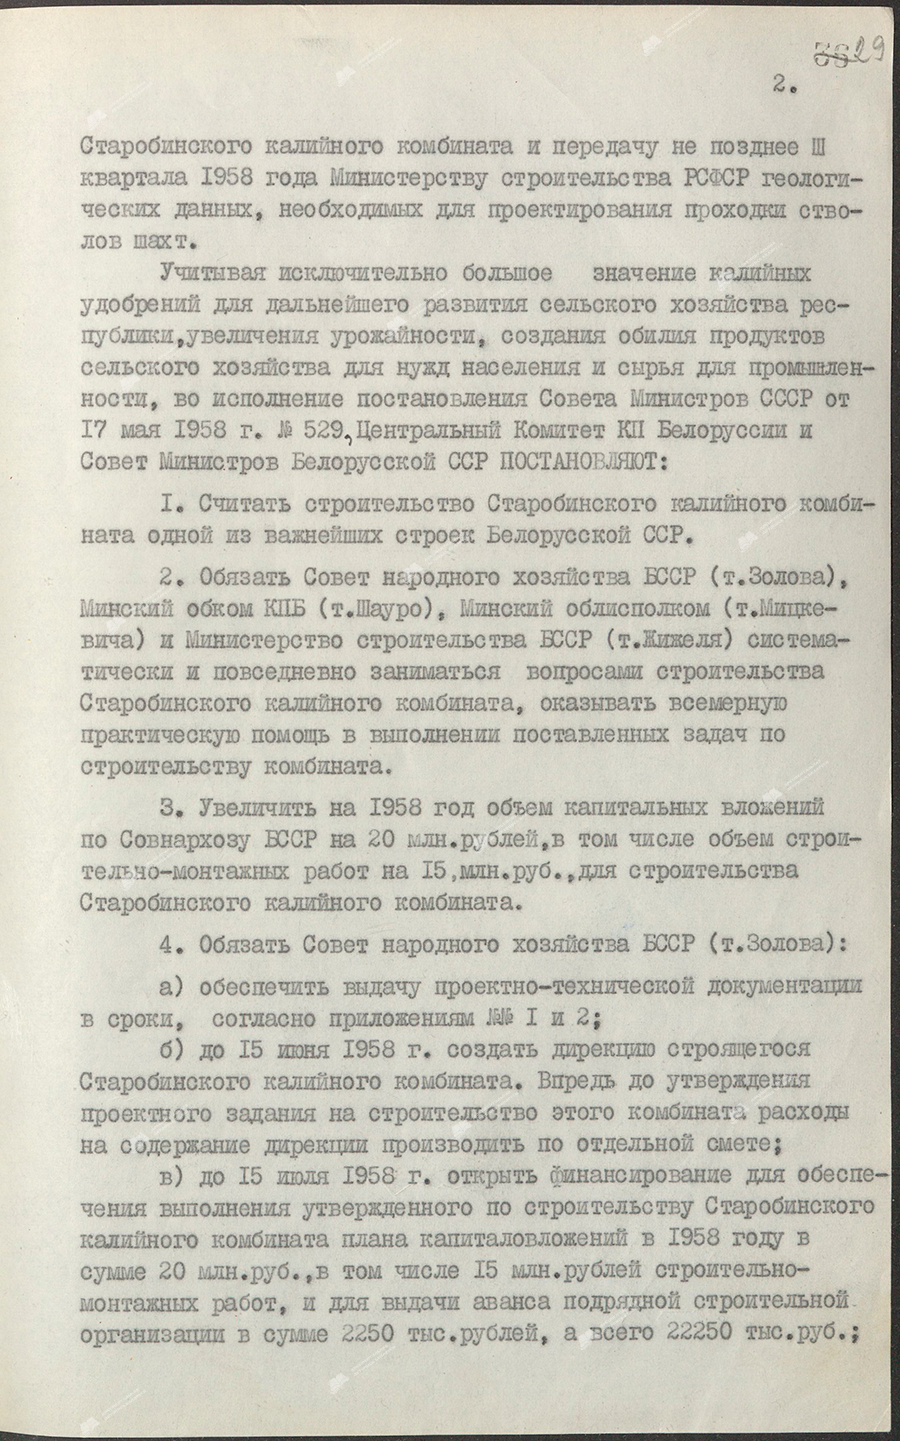 Resolution No. 368 of the Central Committee of the Communist Party of Belarus and the Council of Ministers of the BSSR «On the construction of the Starobinsky Potash Plant»-стр. 1